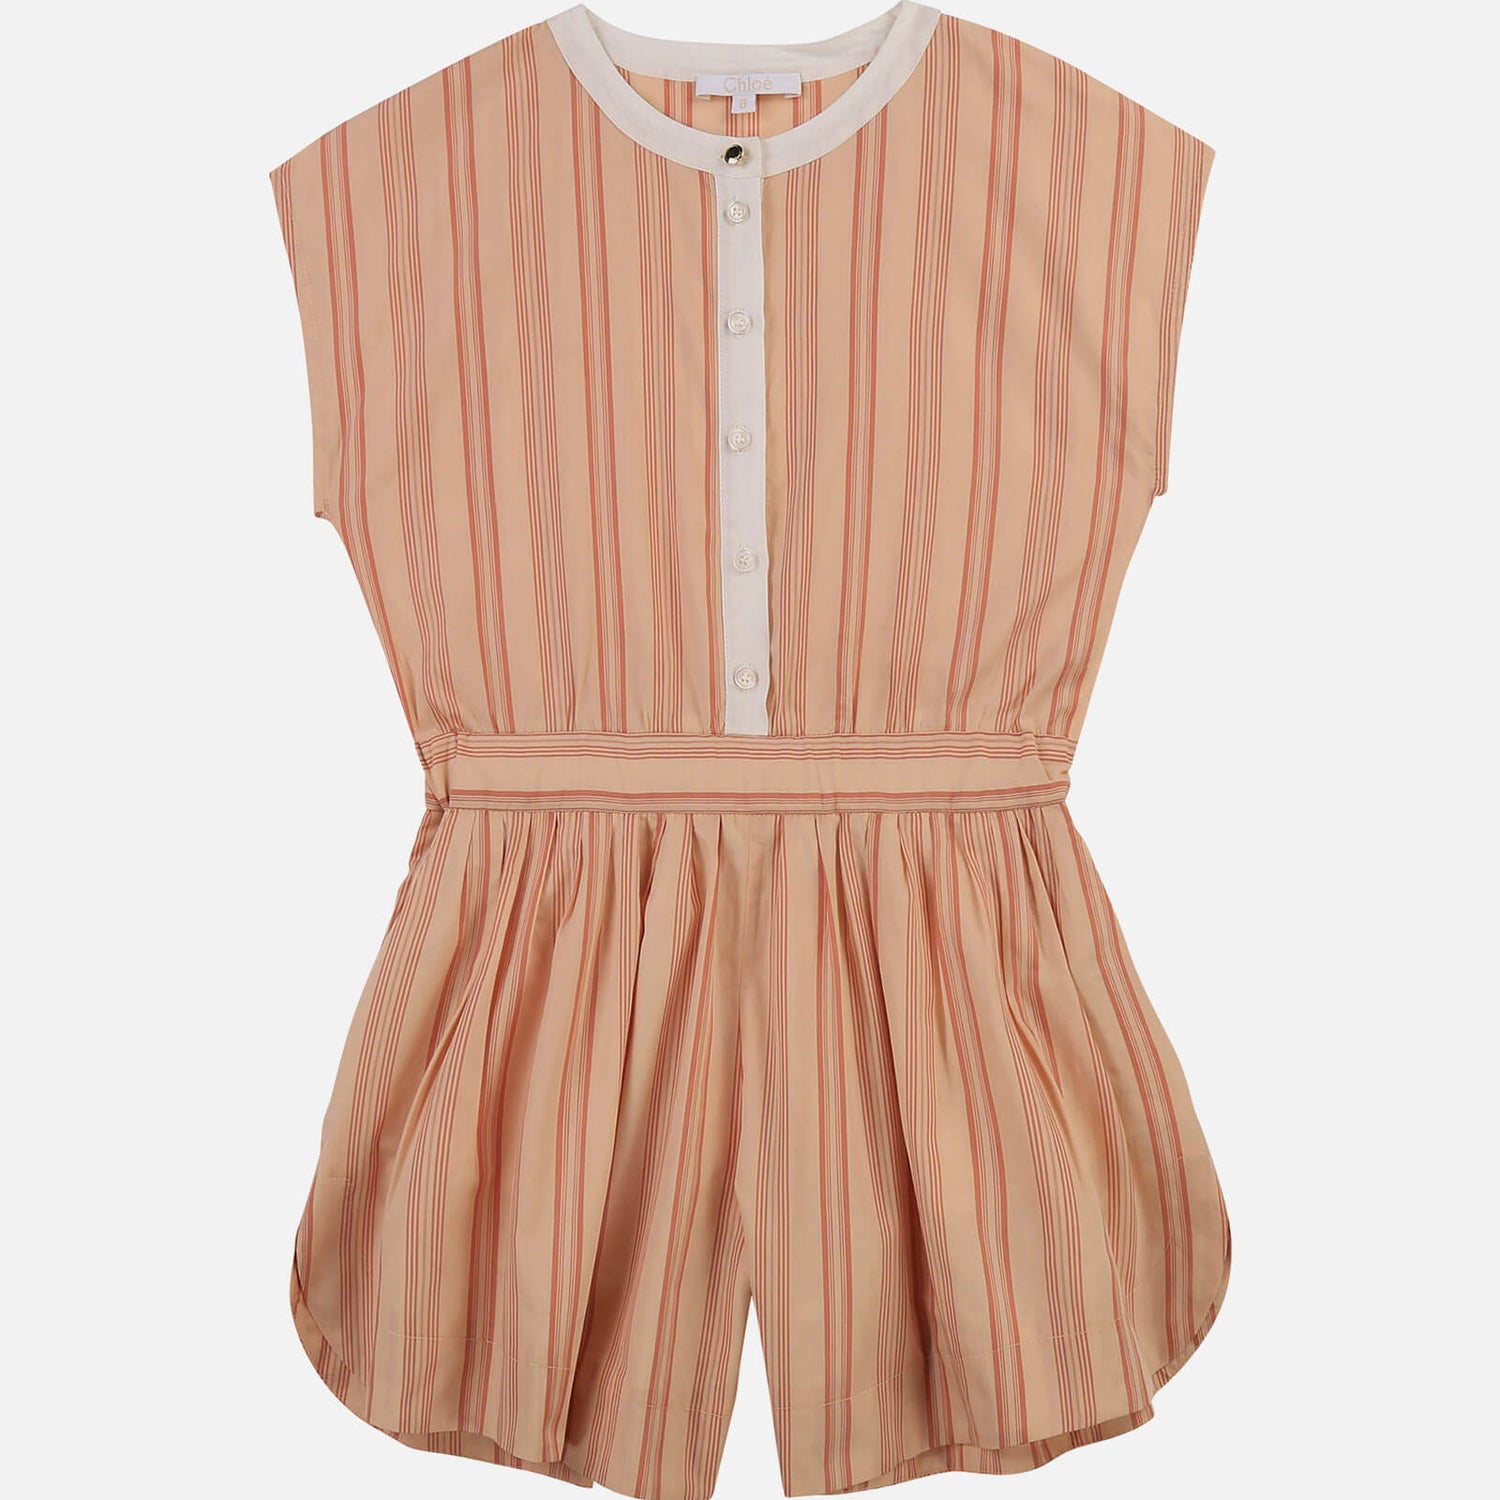 Chloe Girls' All In One Playsuit - Nude